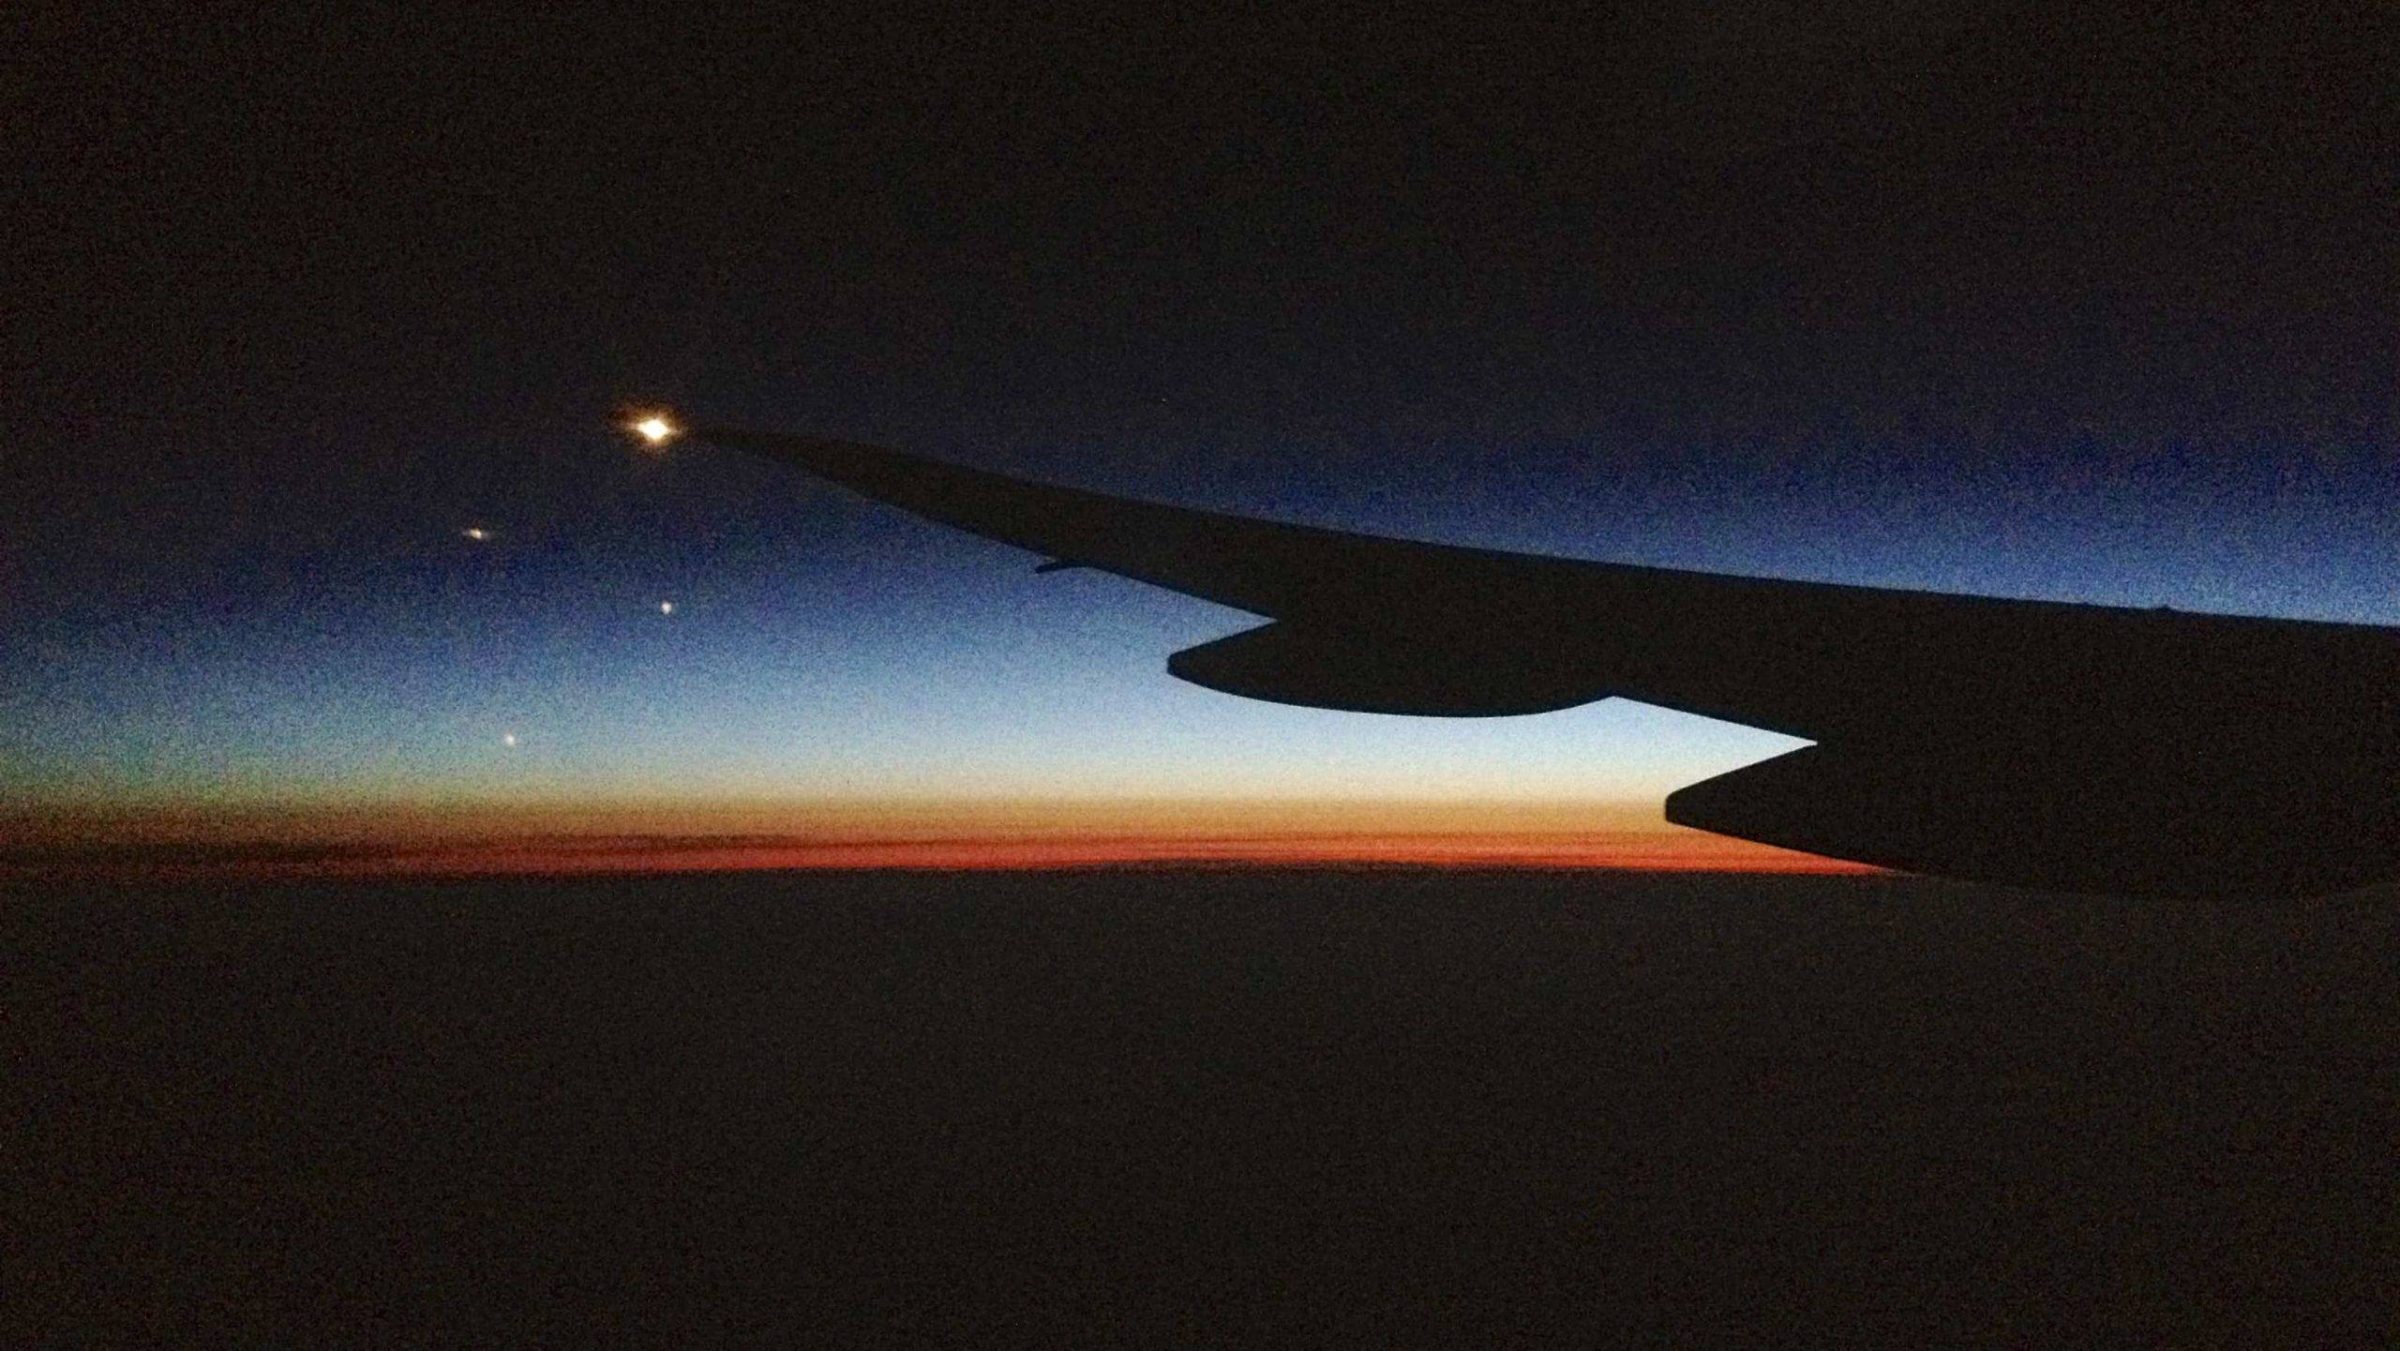 Sunset beyond an airplane wing.